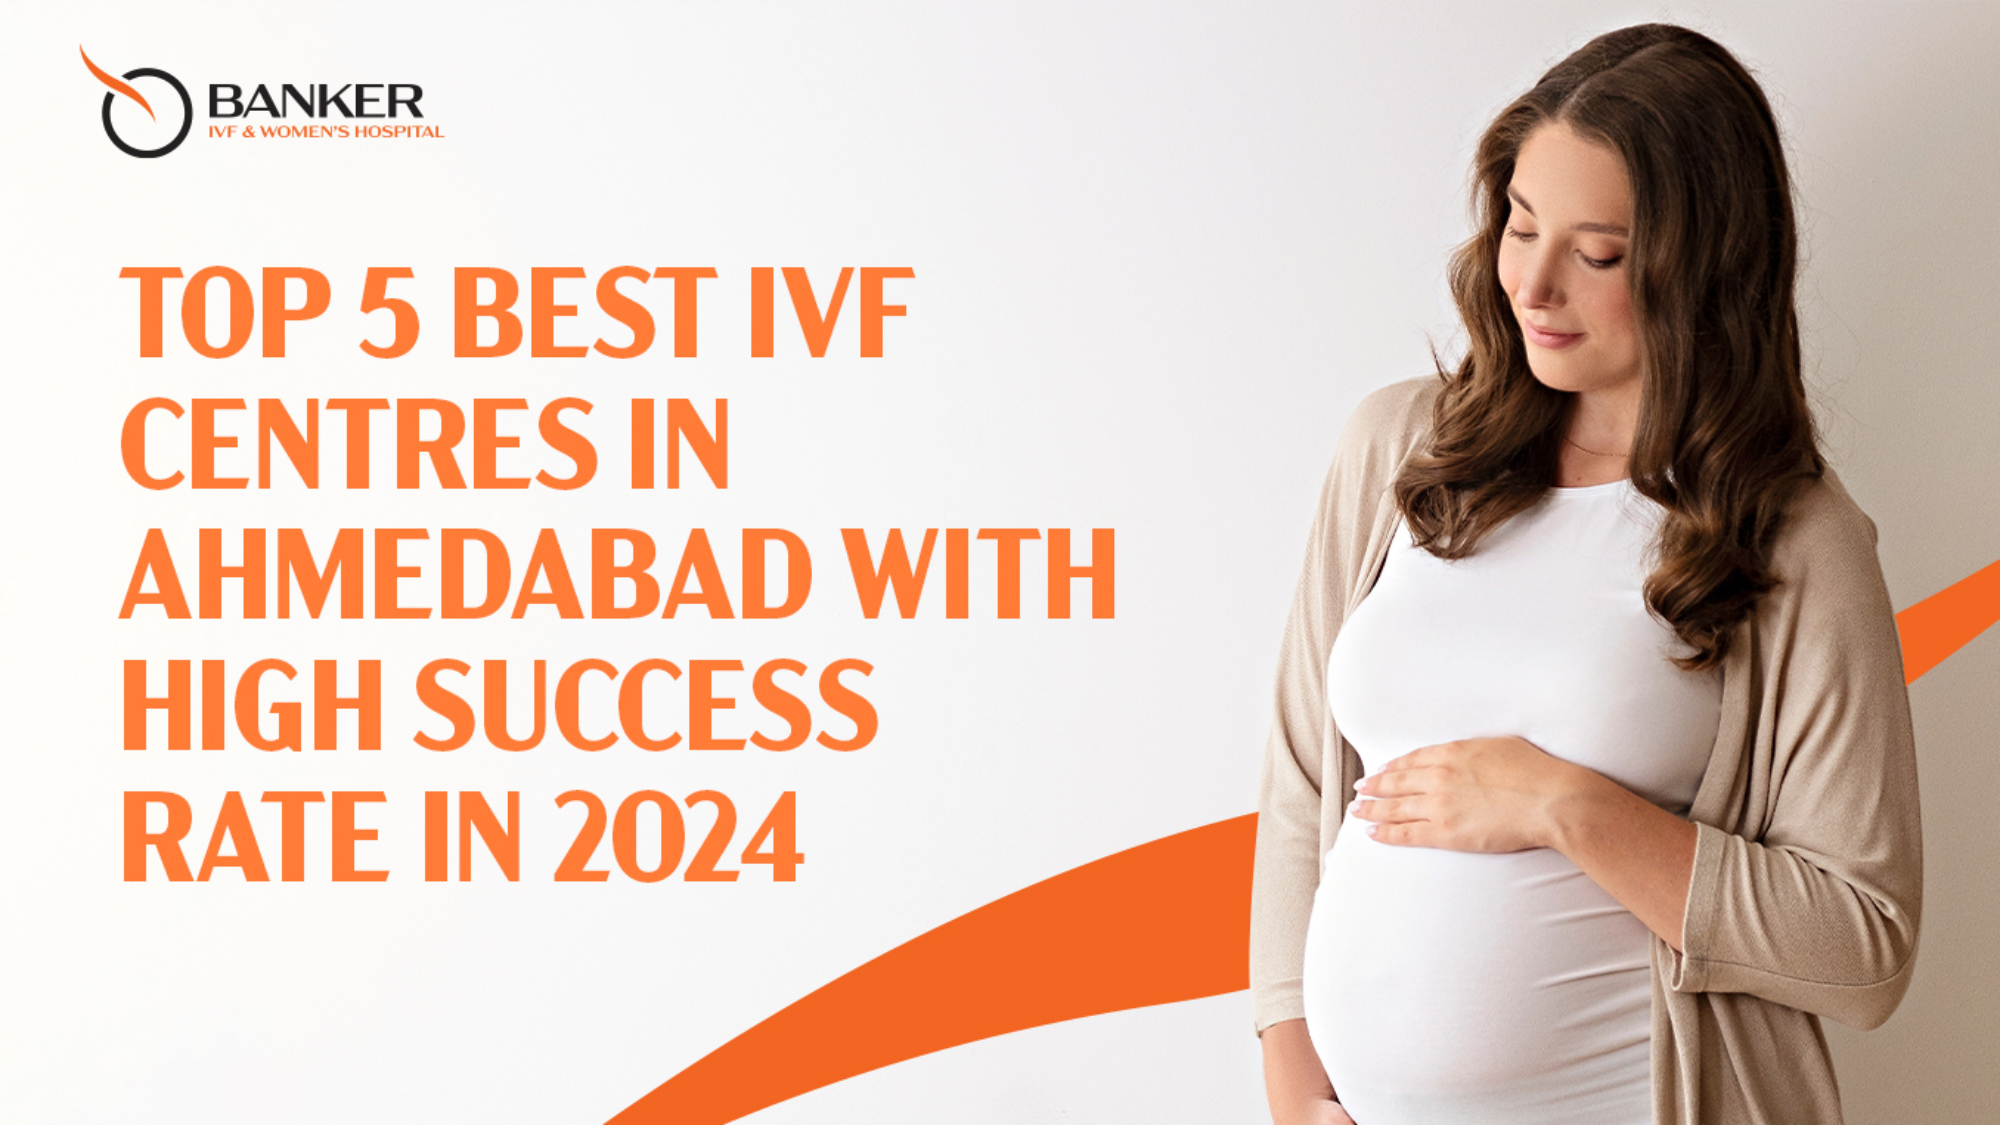 Top 5 Best IVF Hospitals in Ahmedabad